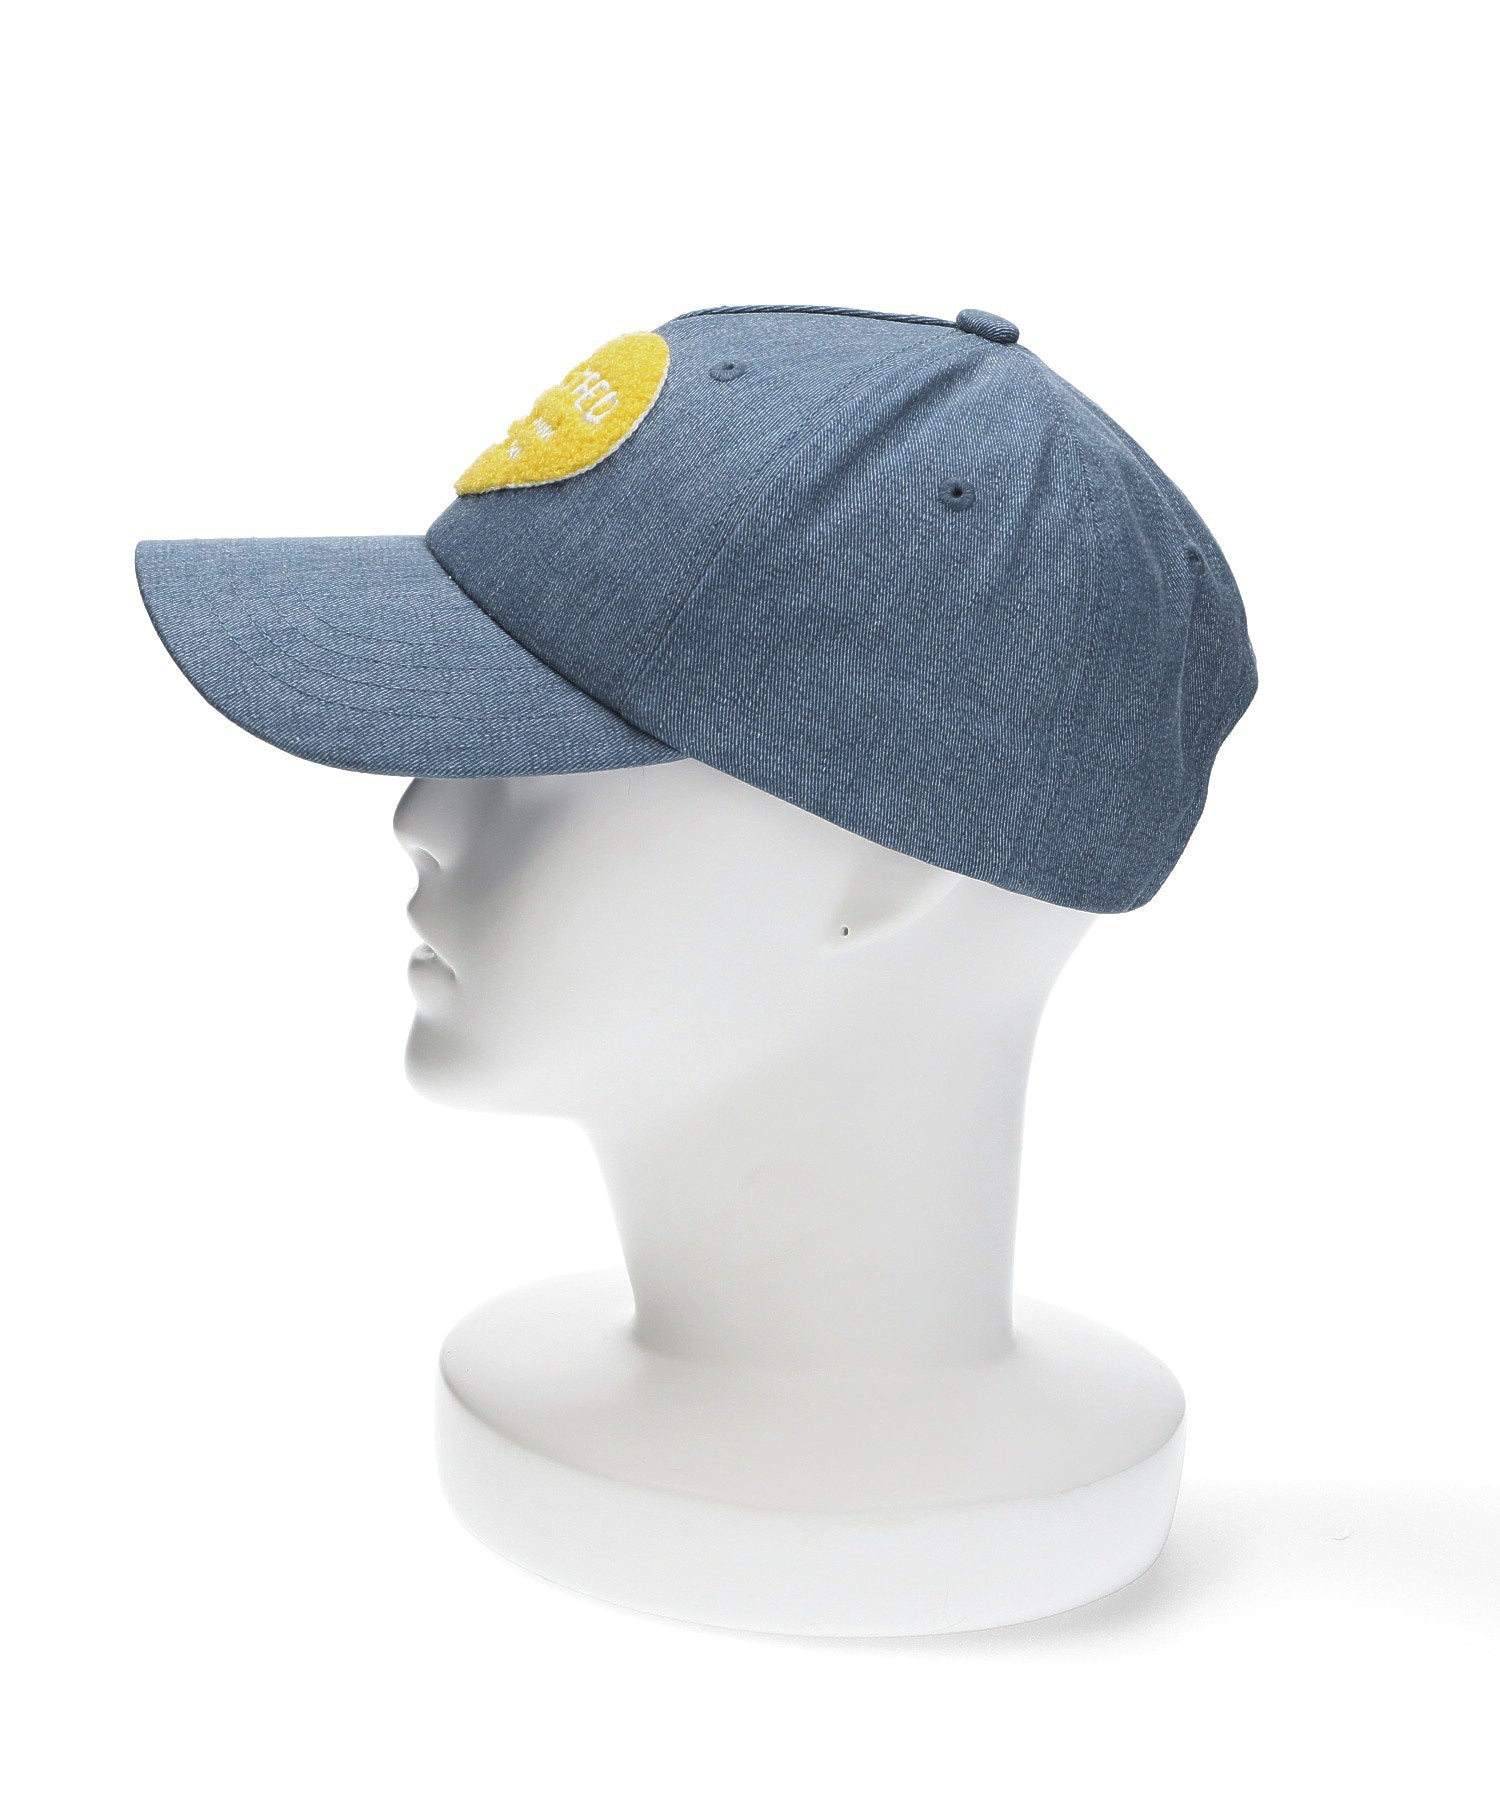 G.M.G.D EMBROIDERED CAP